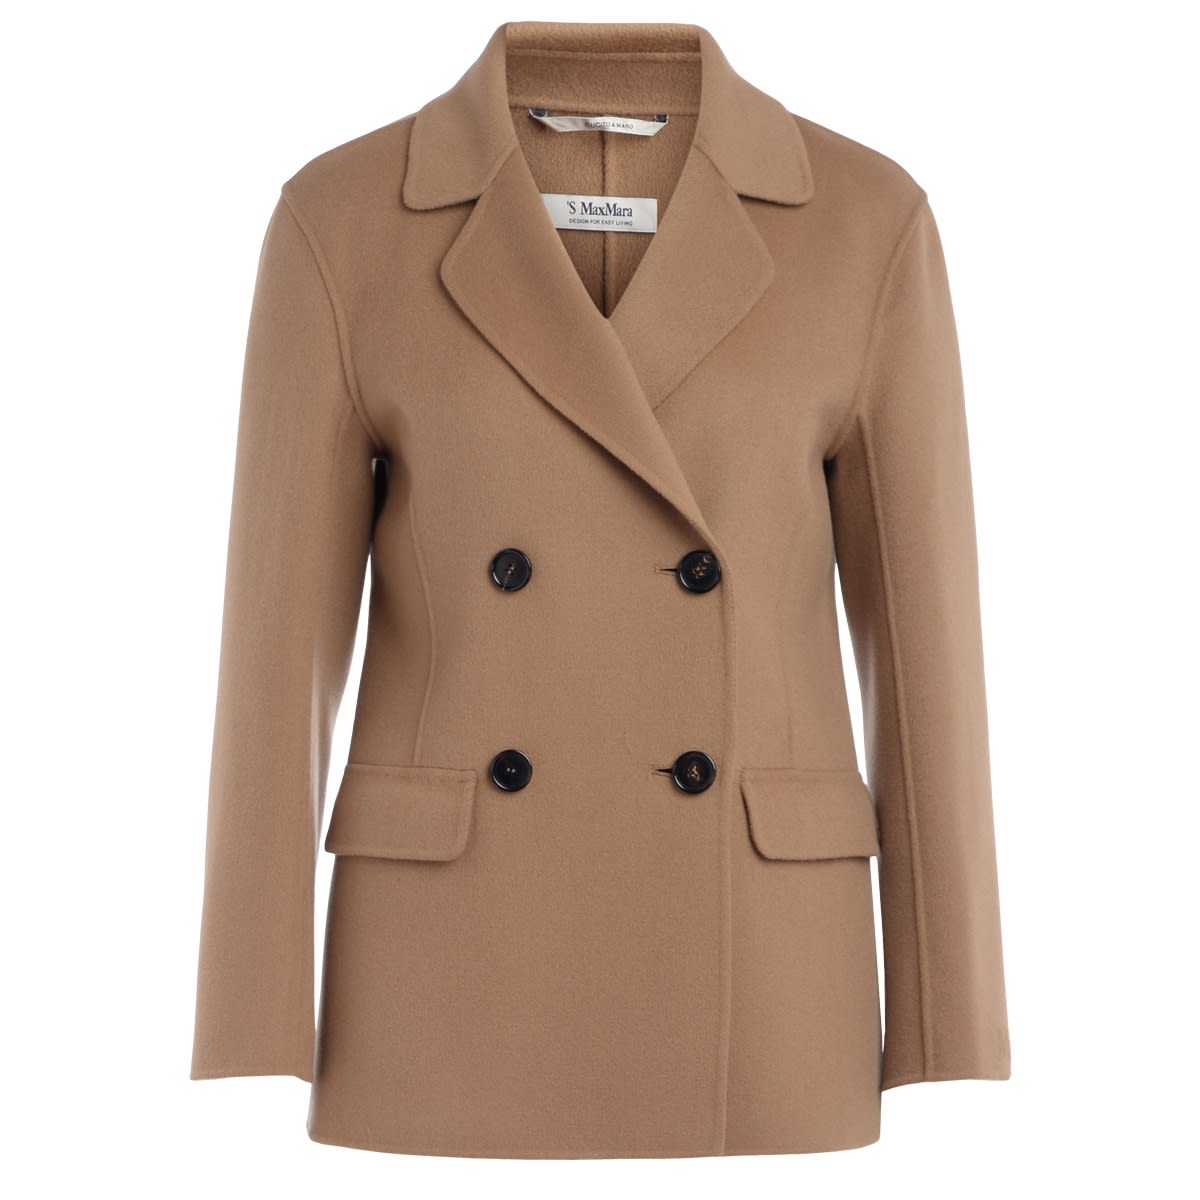 Max Mara s Double-breasted Jacket In Camel-colored Wool